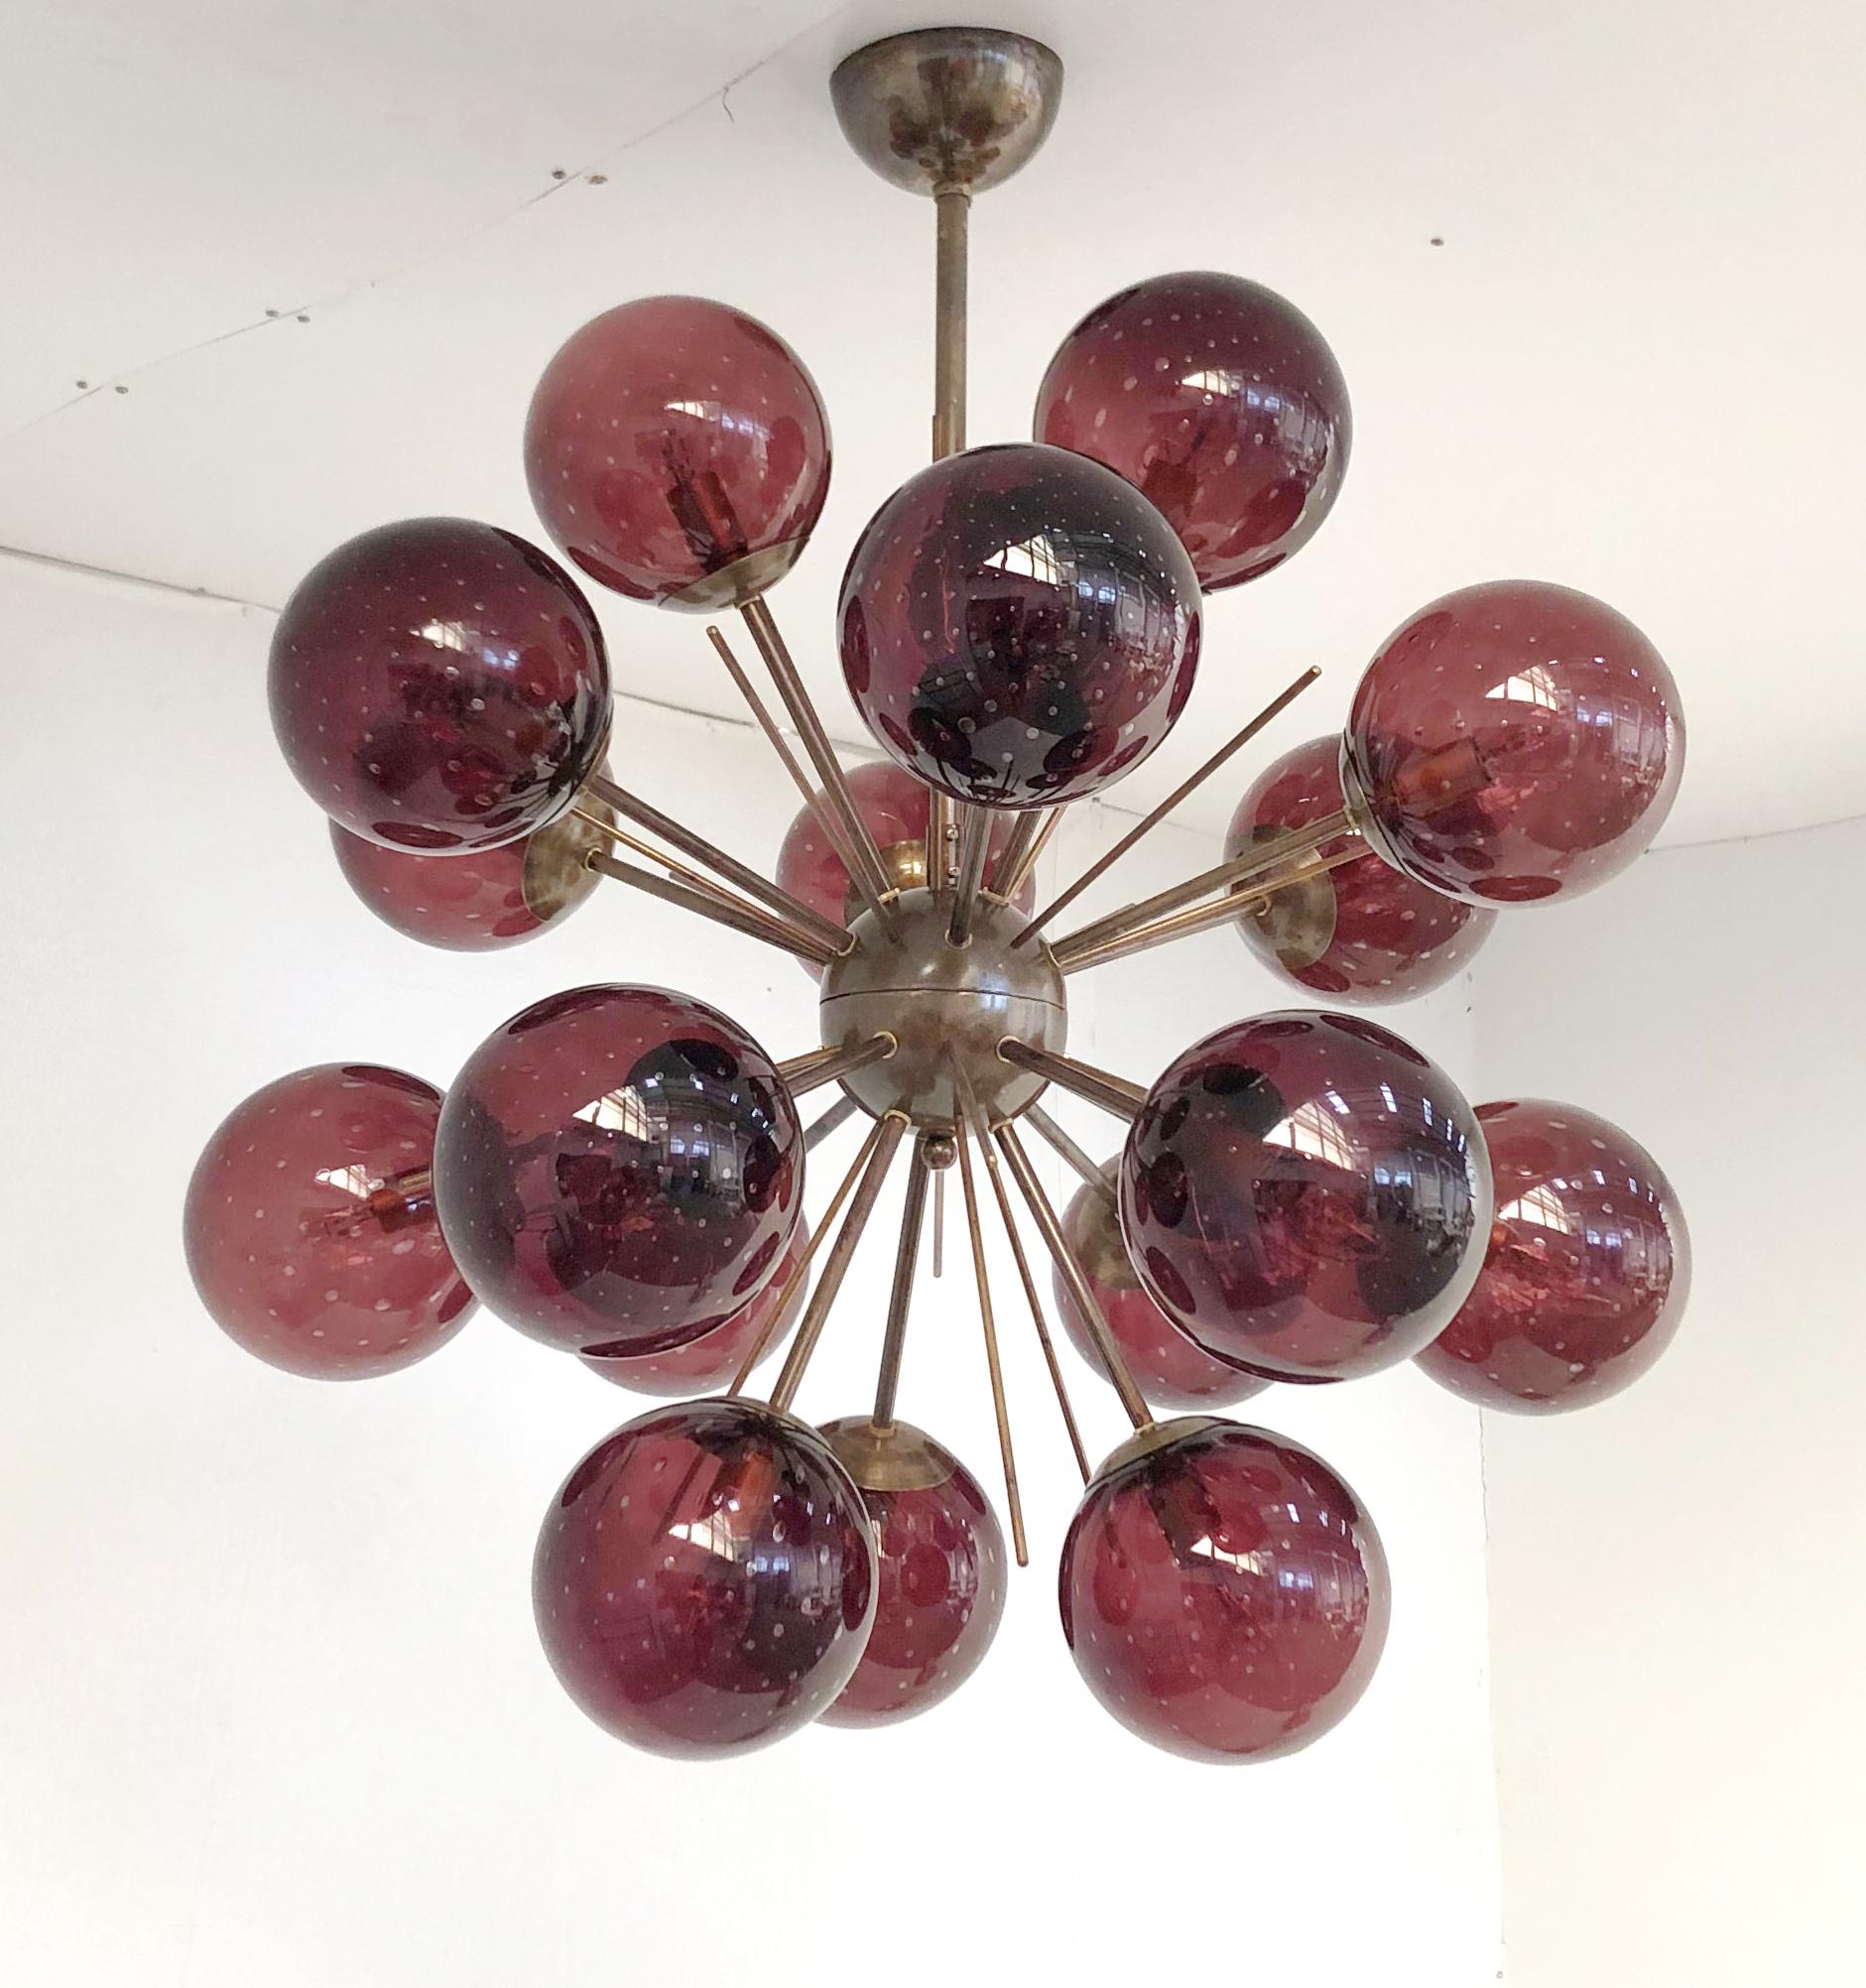 Italian sputnik chandelier with 18 murano glass globes mounted on brass frame / Designed by Fabio Bergomi for Fabio Ltd / Made in Italy
18 lights / E12 or E14 type / max 40W each
Measures: diameter: 29 inches / height: 32 inches including rod and